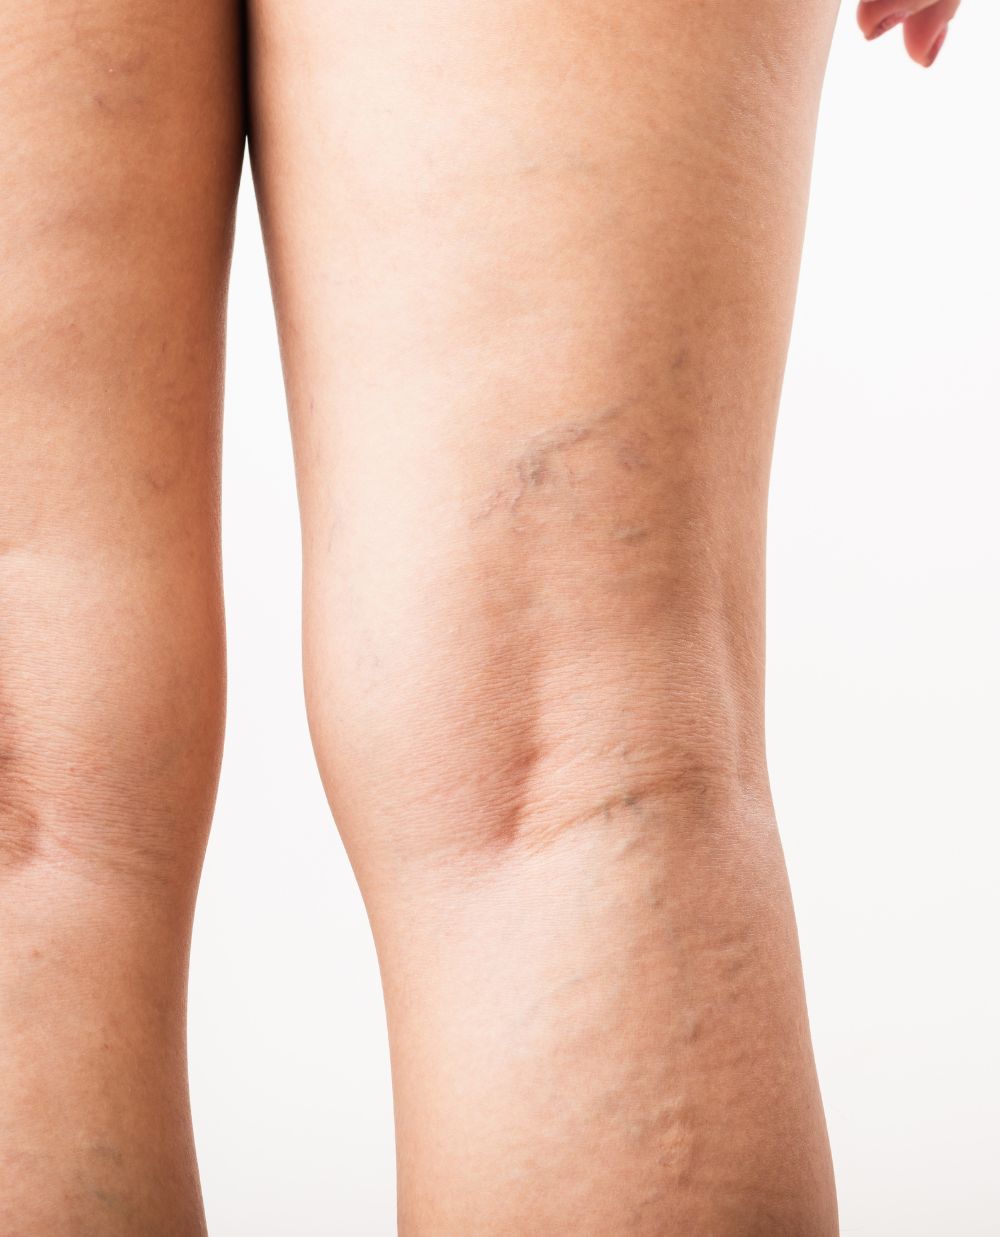 Varicose and spider veins behind the knees in a white woman